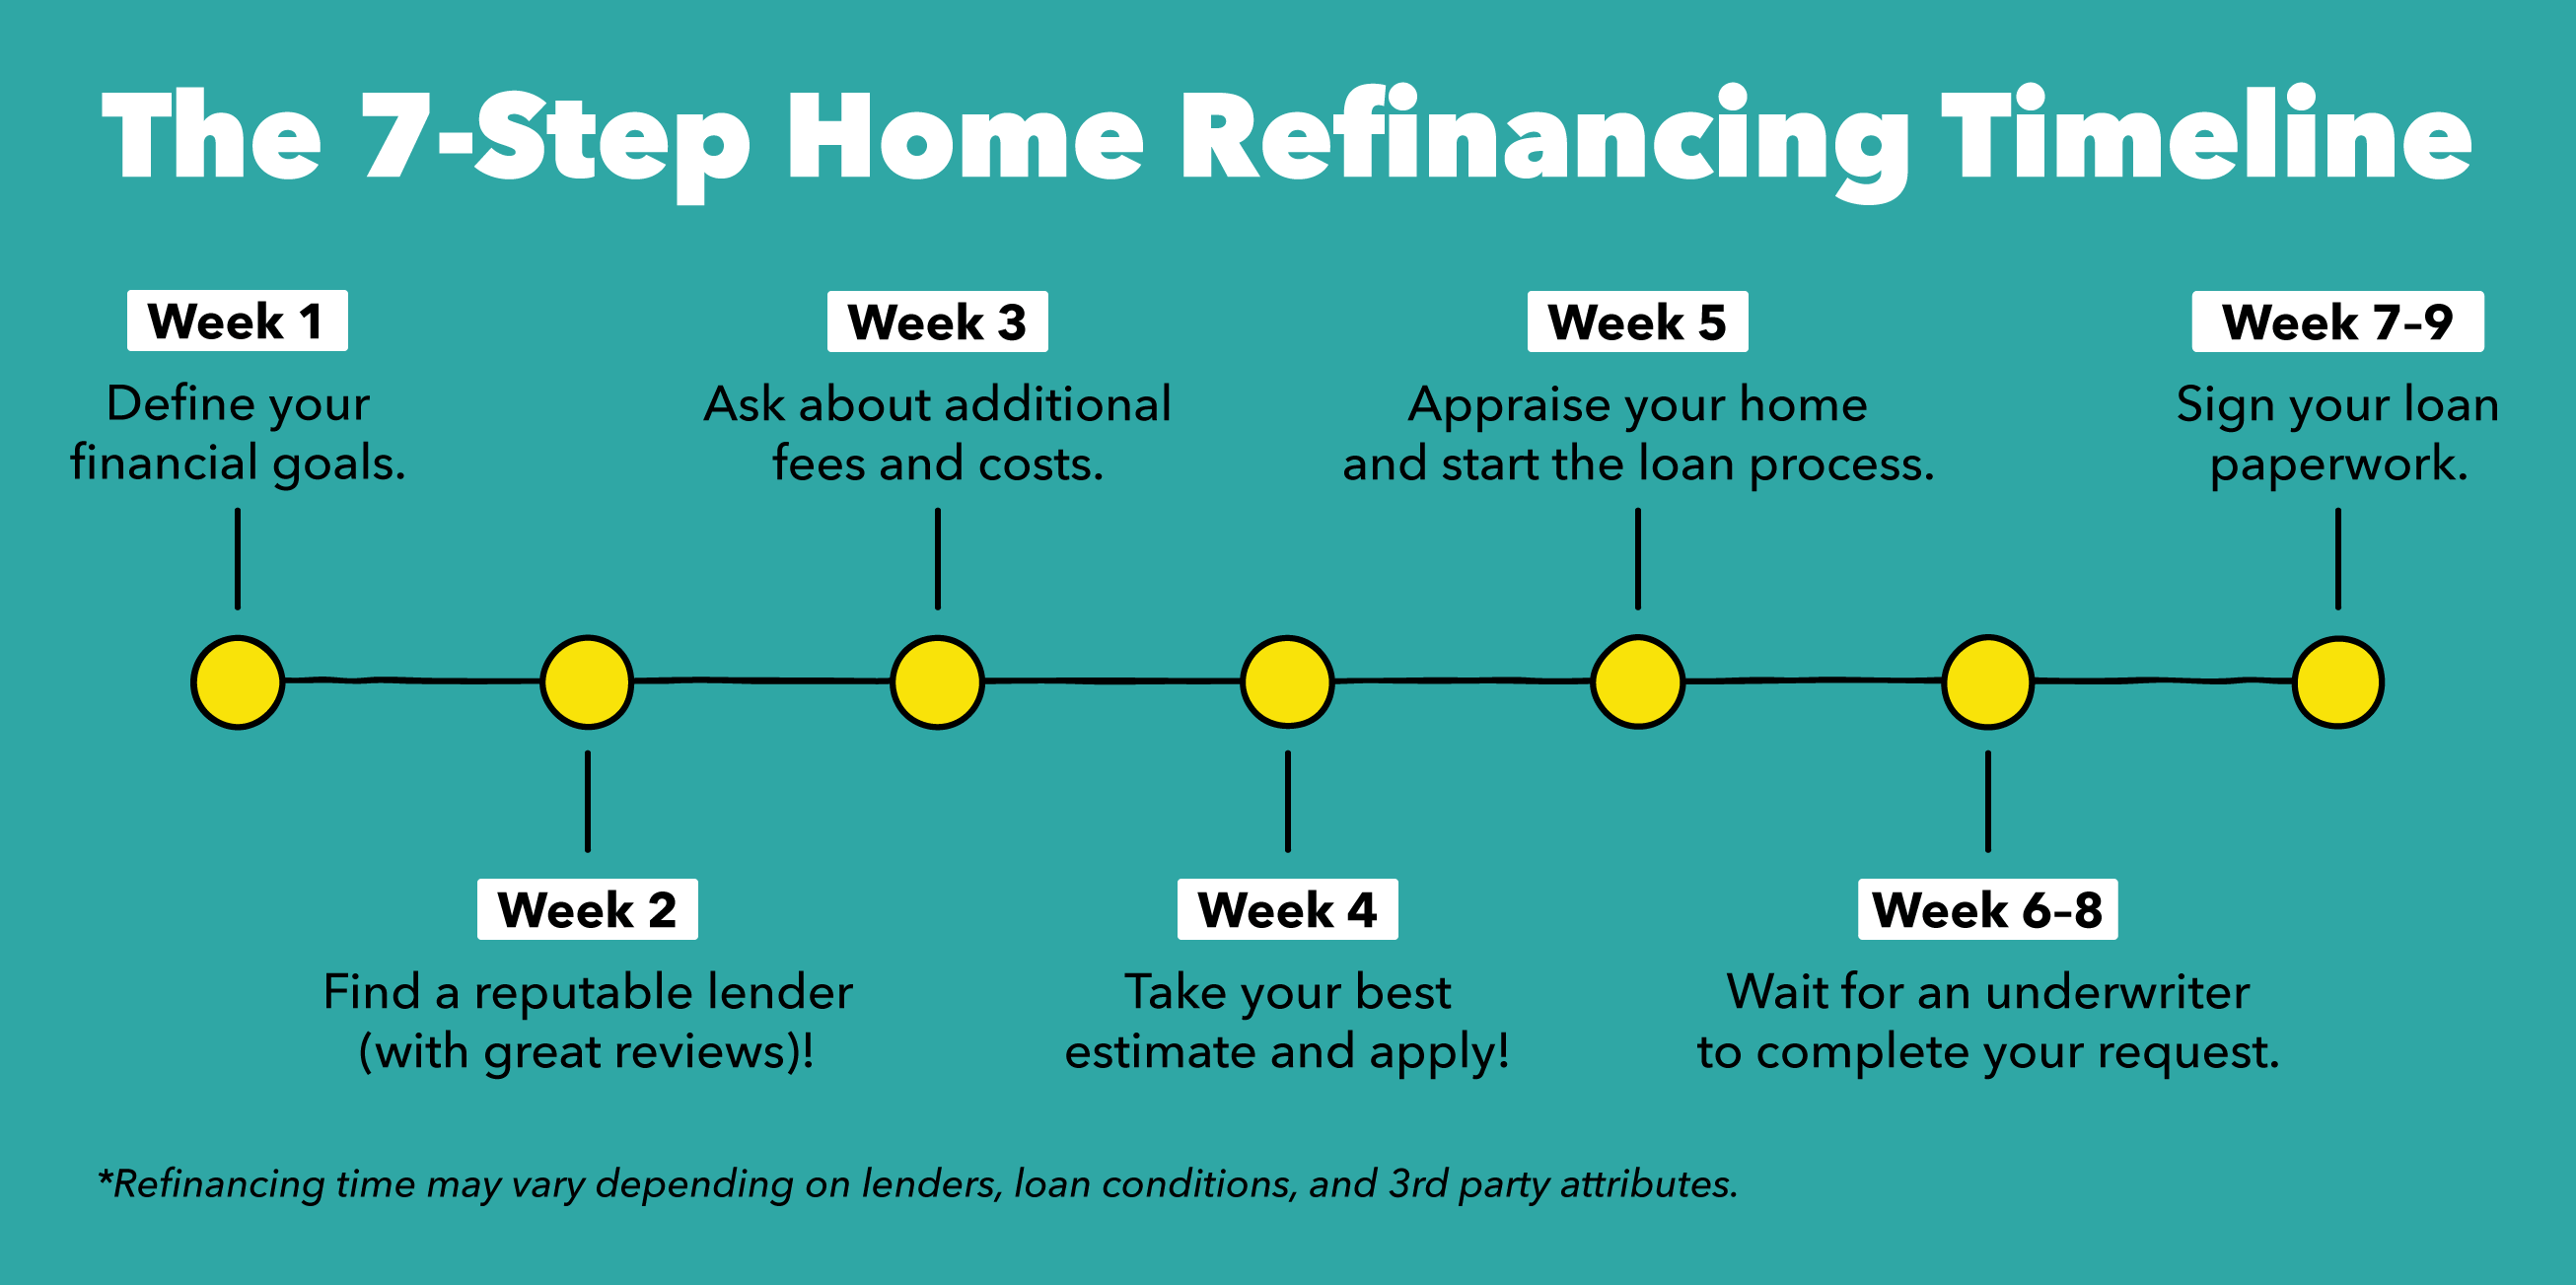 The 7-Step Home Refinancing Timeline